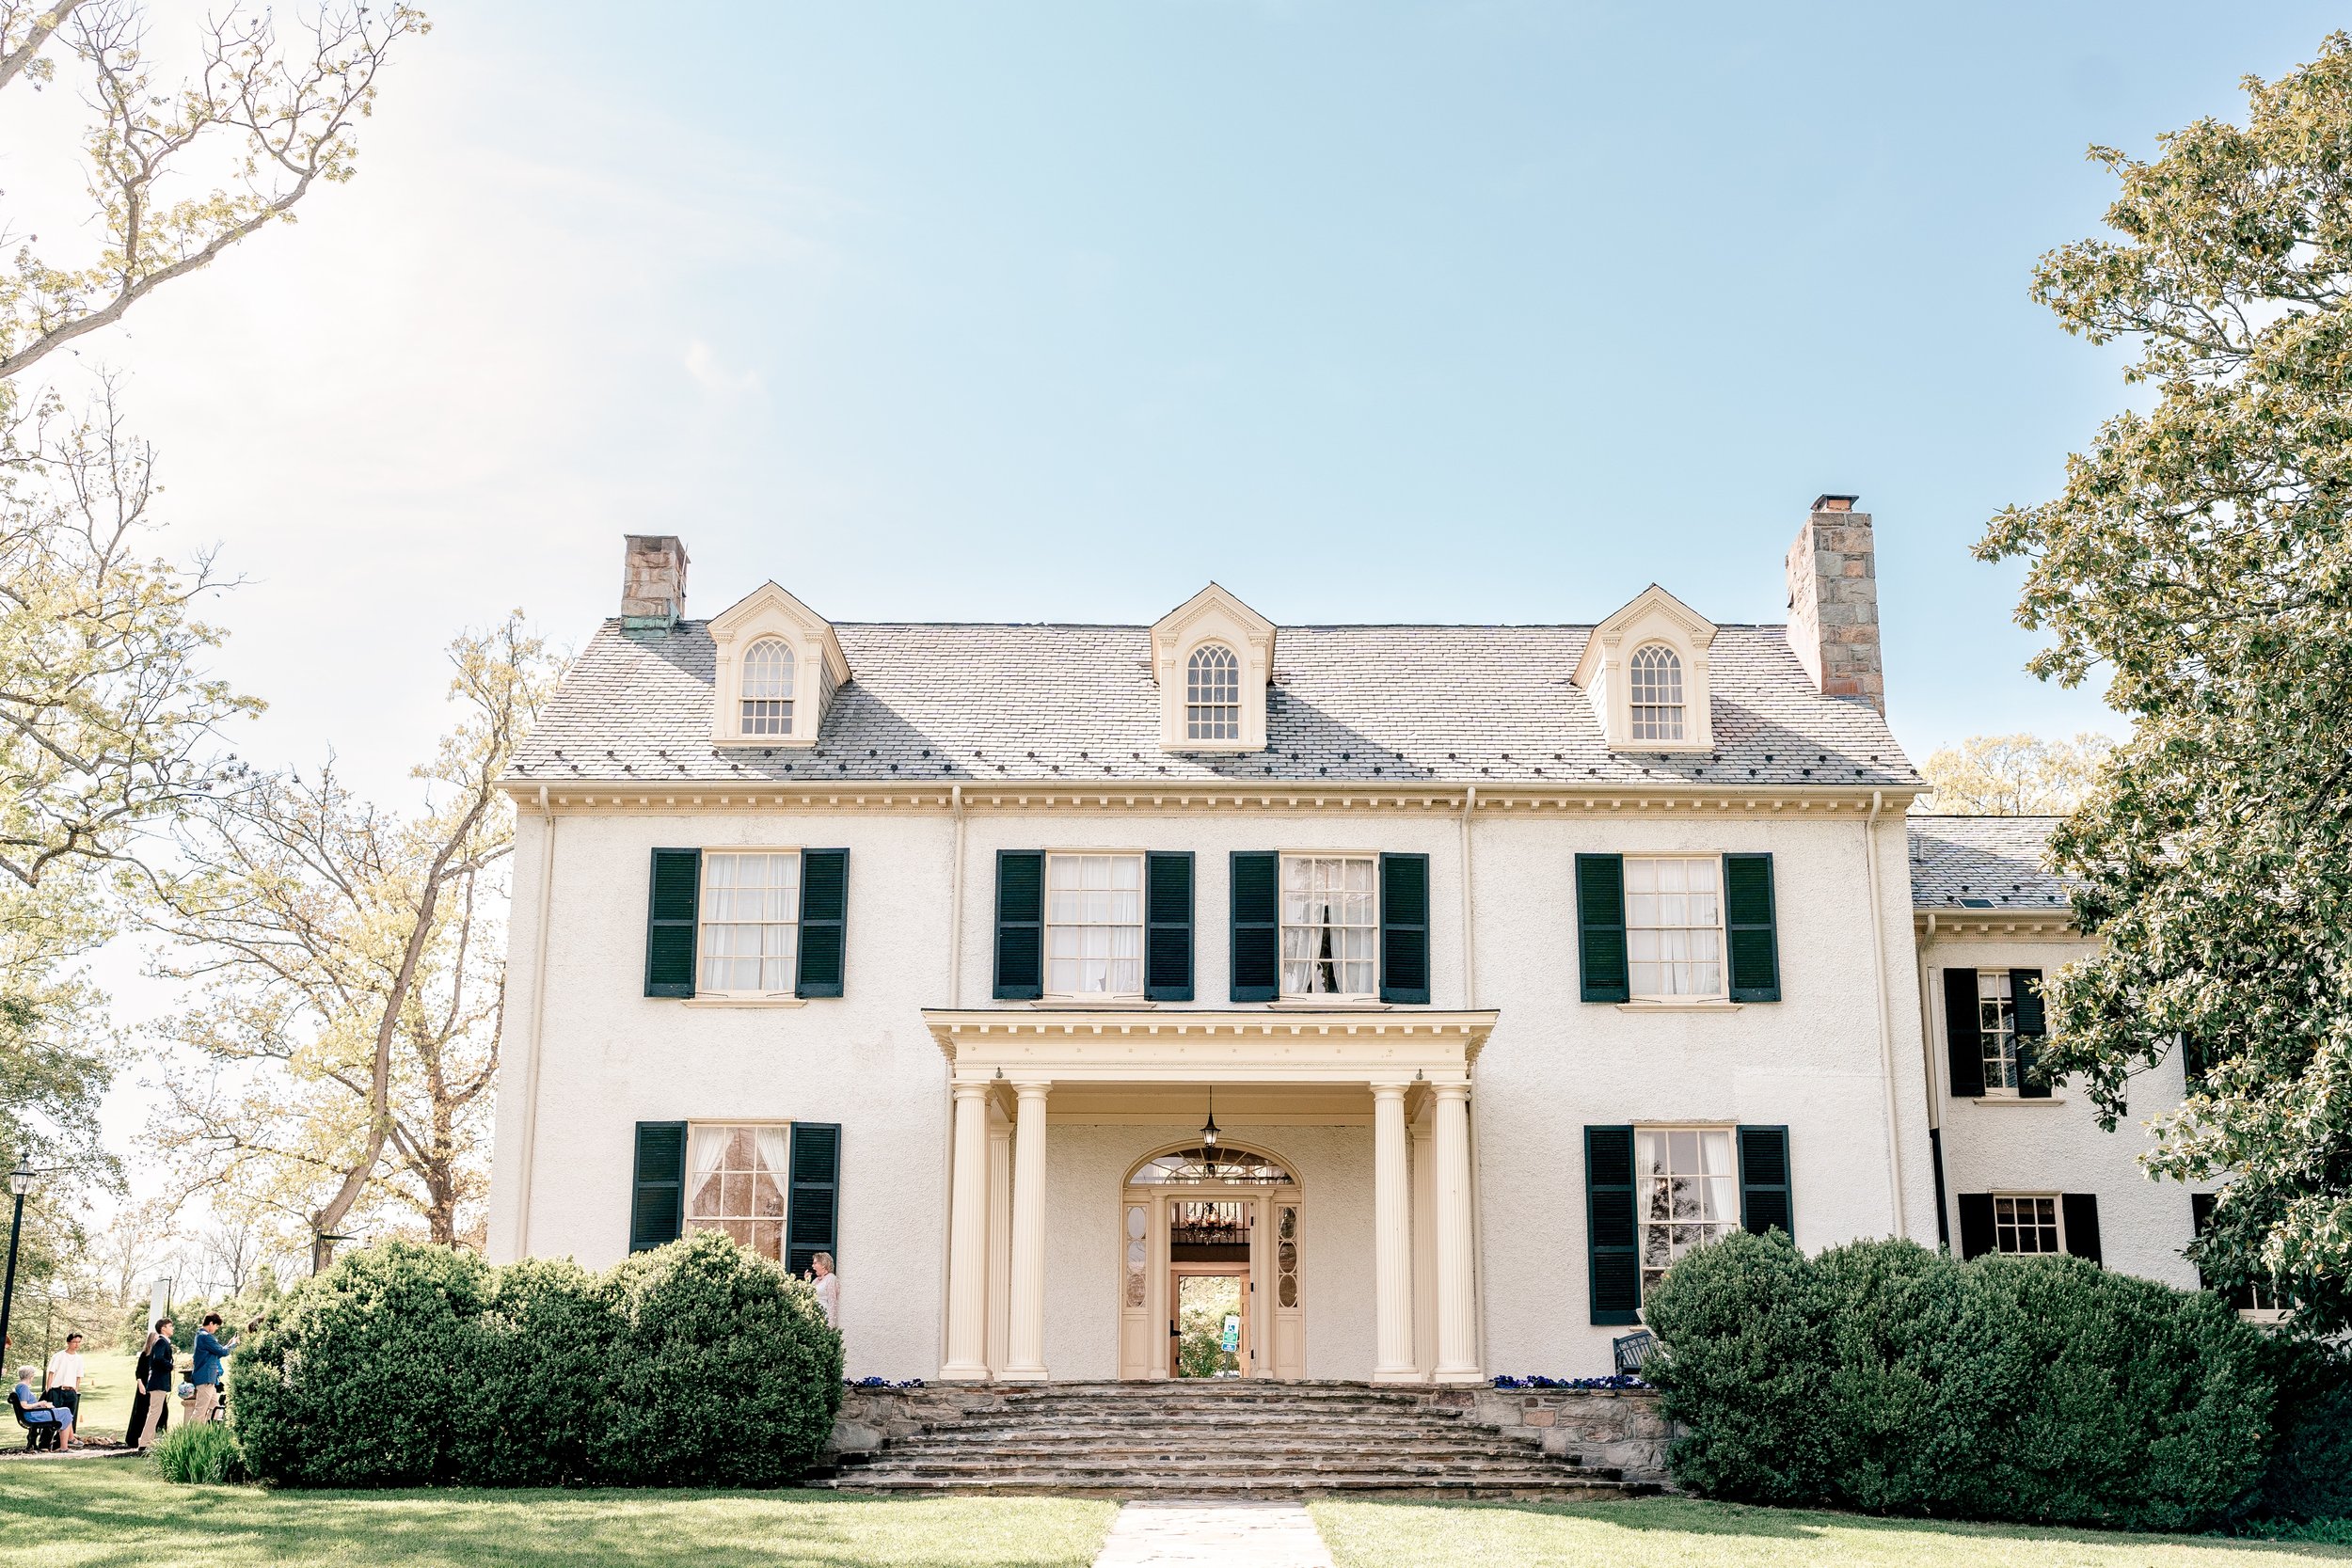 The facade of the historic house during a wedding at Rust Manor House in Leesburg Virginia